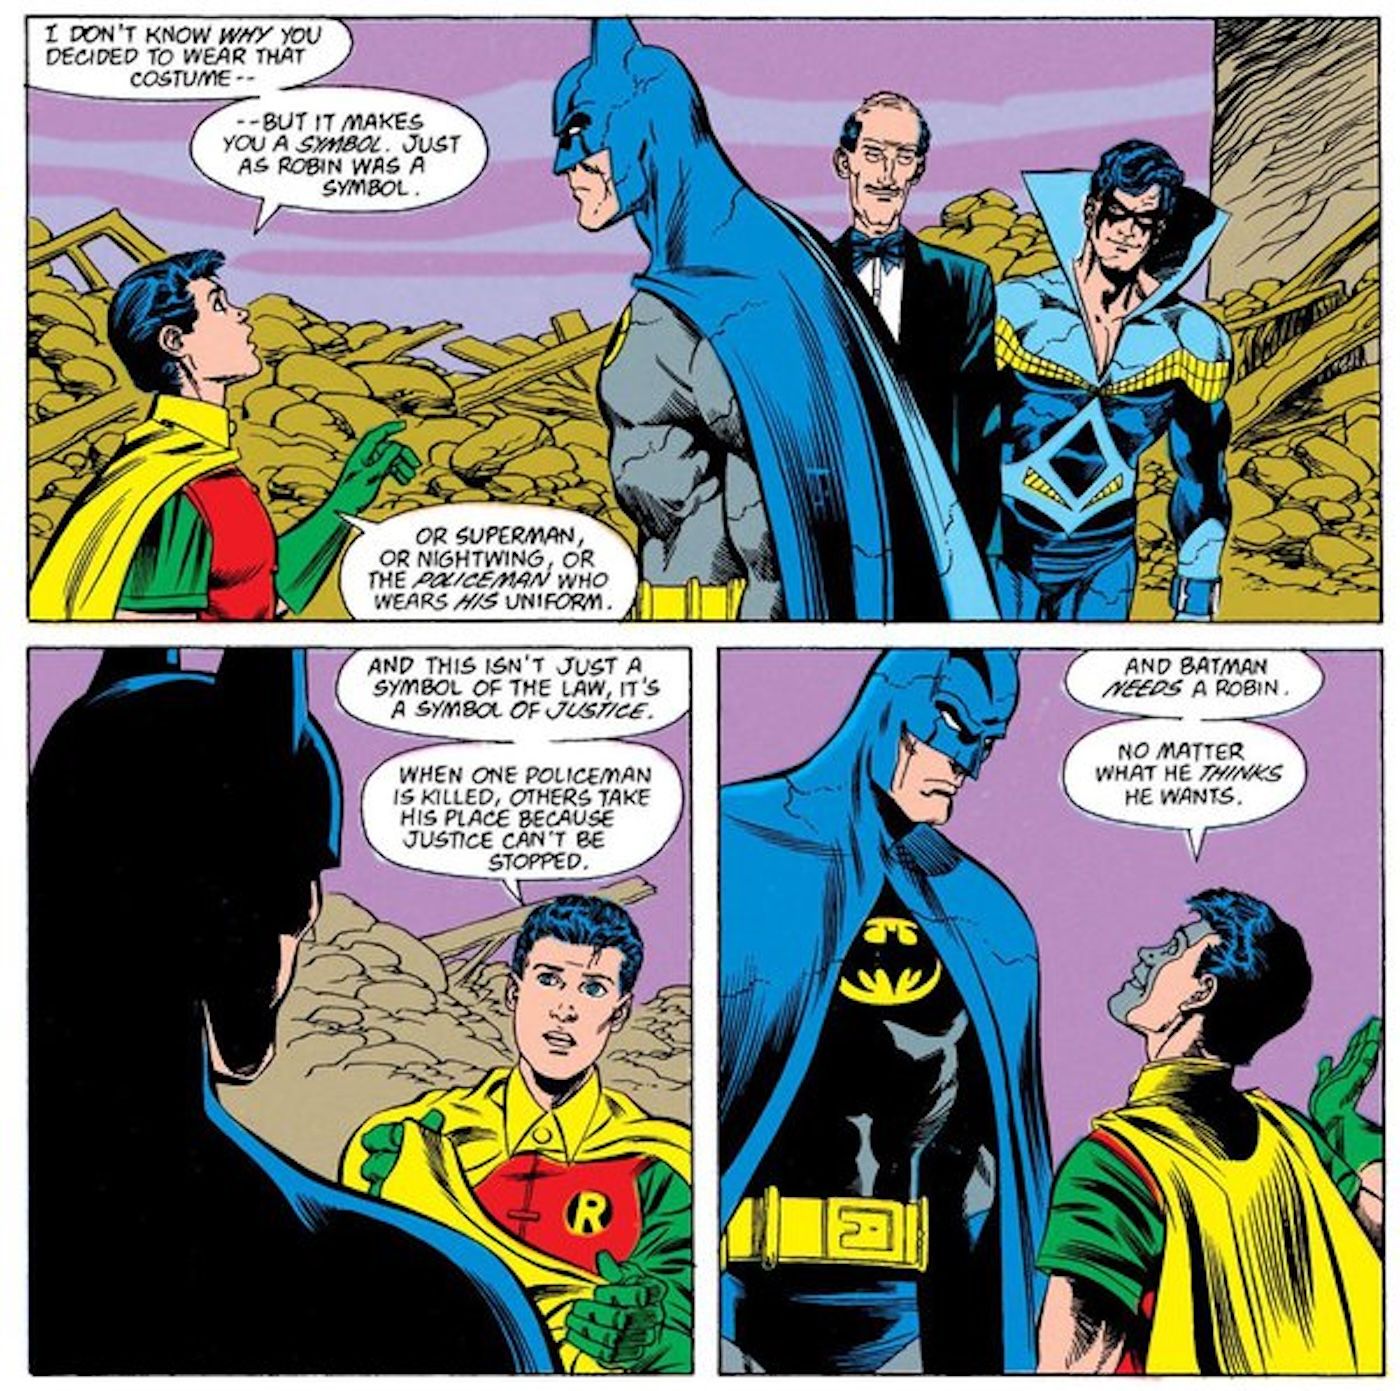 Comic book panels: Tim Drake as Robin talks to Batman as Nightwing and Alfred watch.